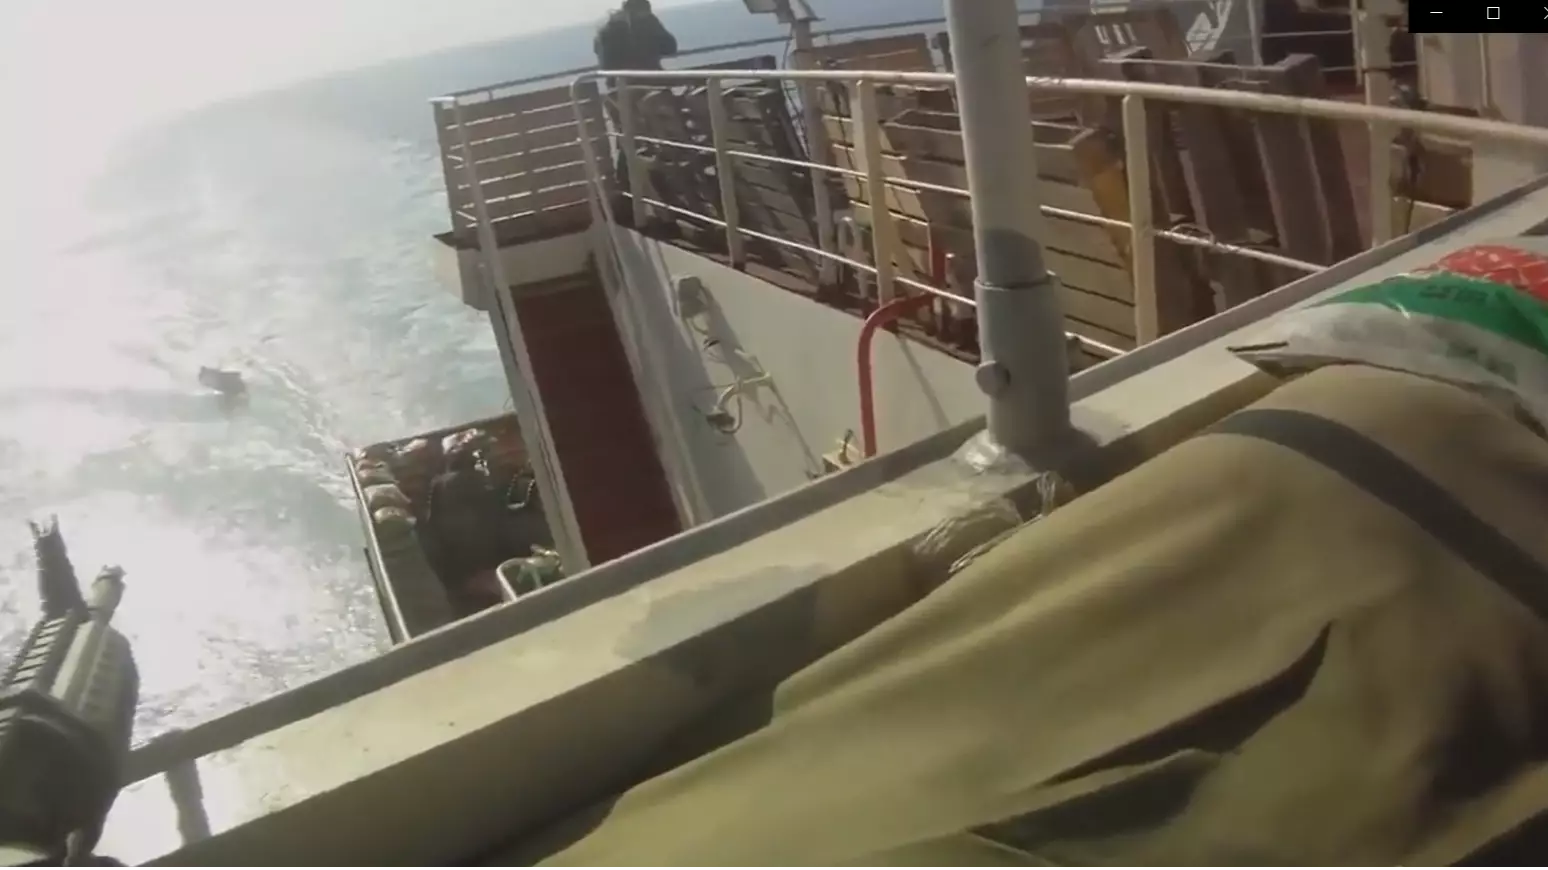 Private Security Shoot At Somali Pirates Trying To Hijack Ship 